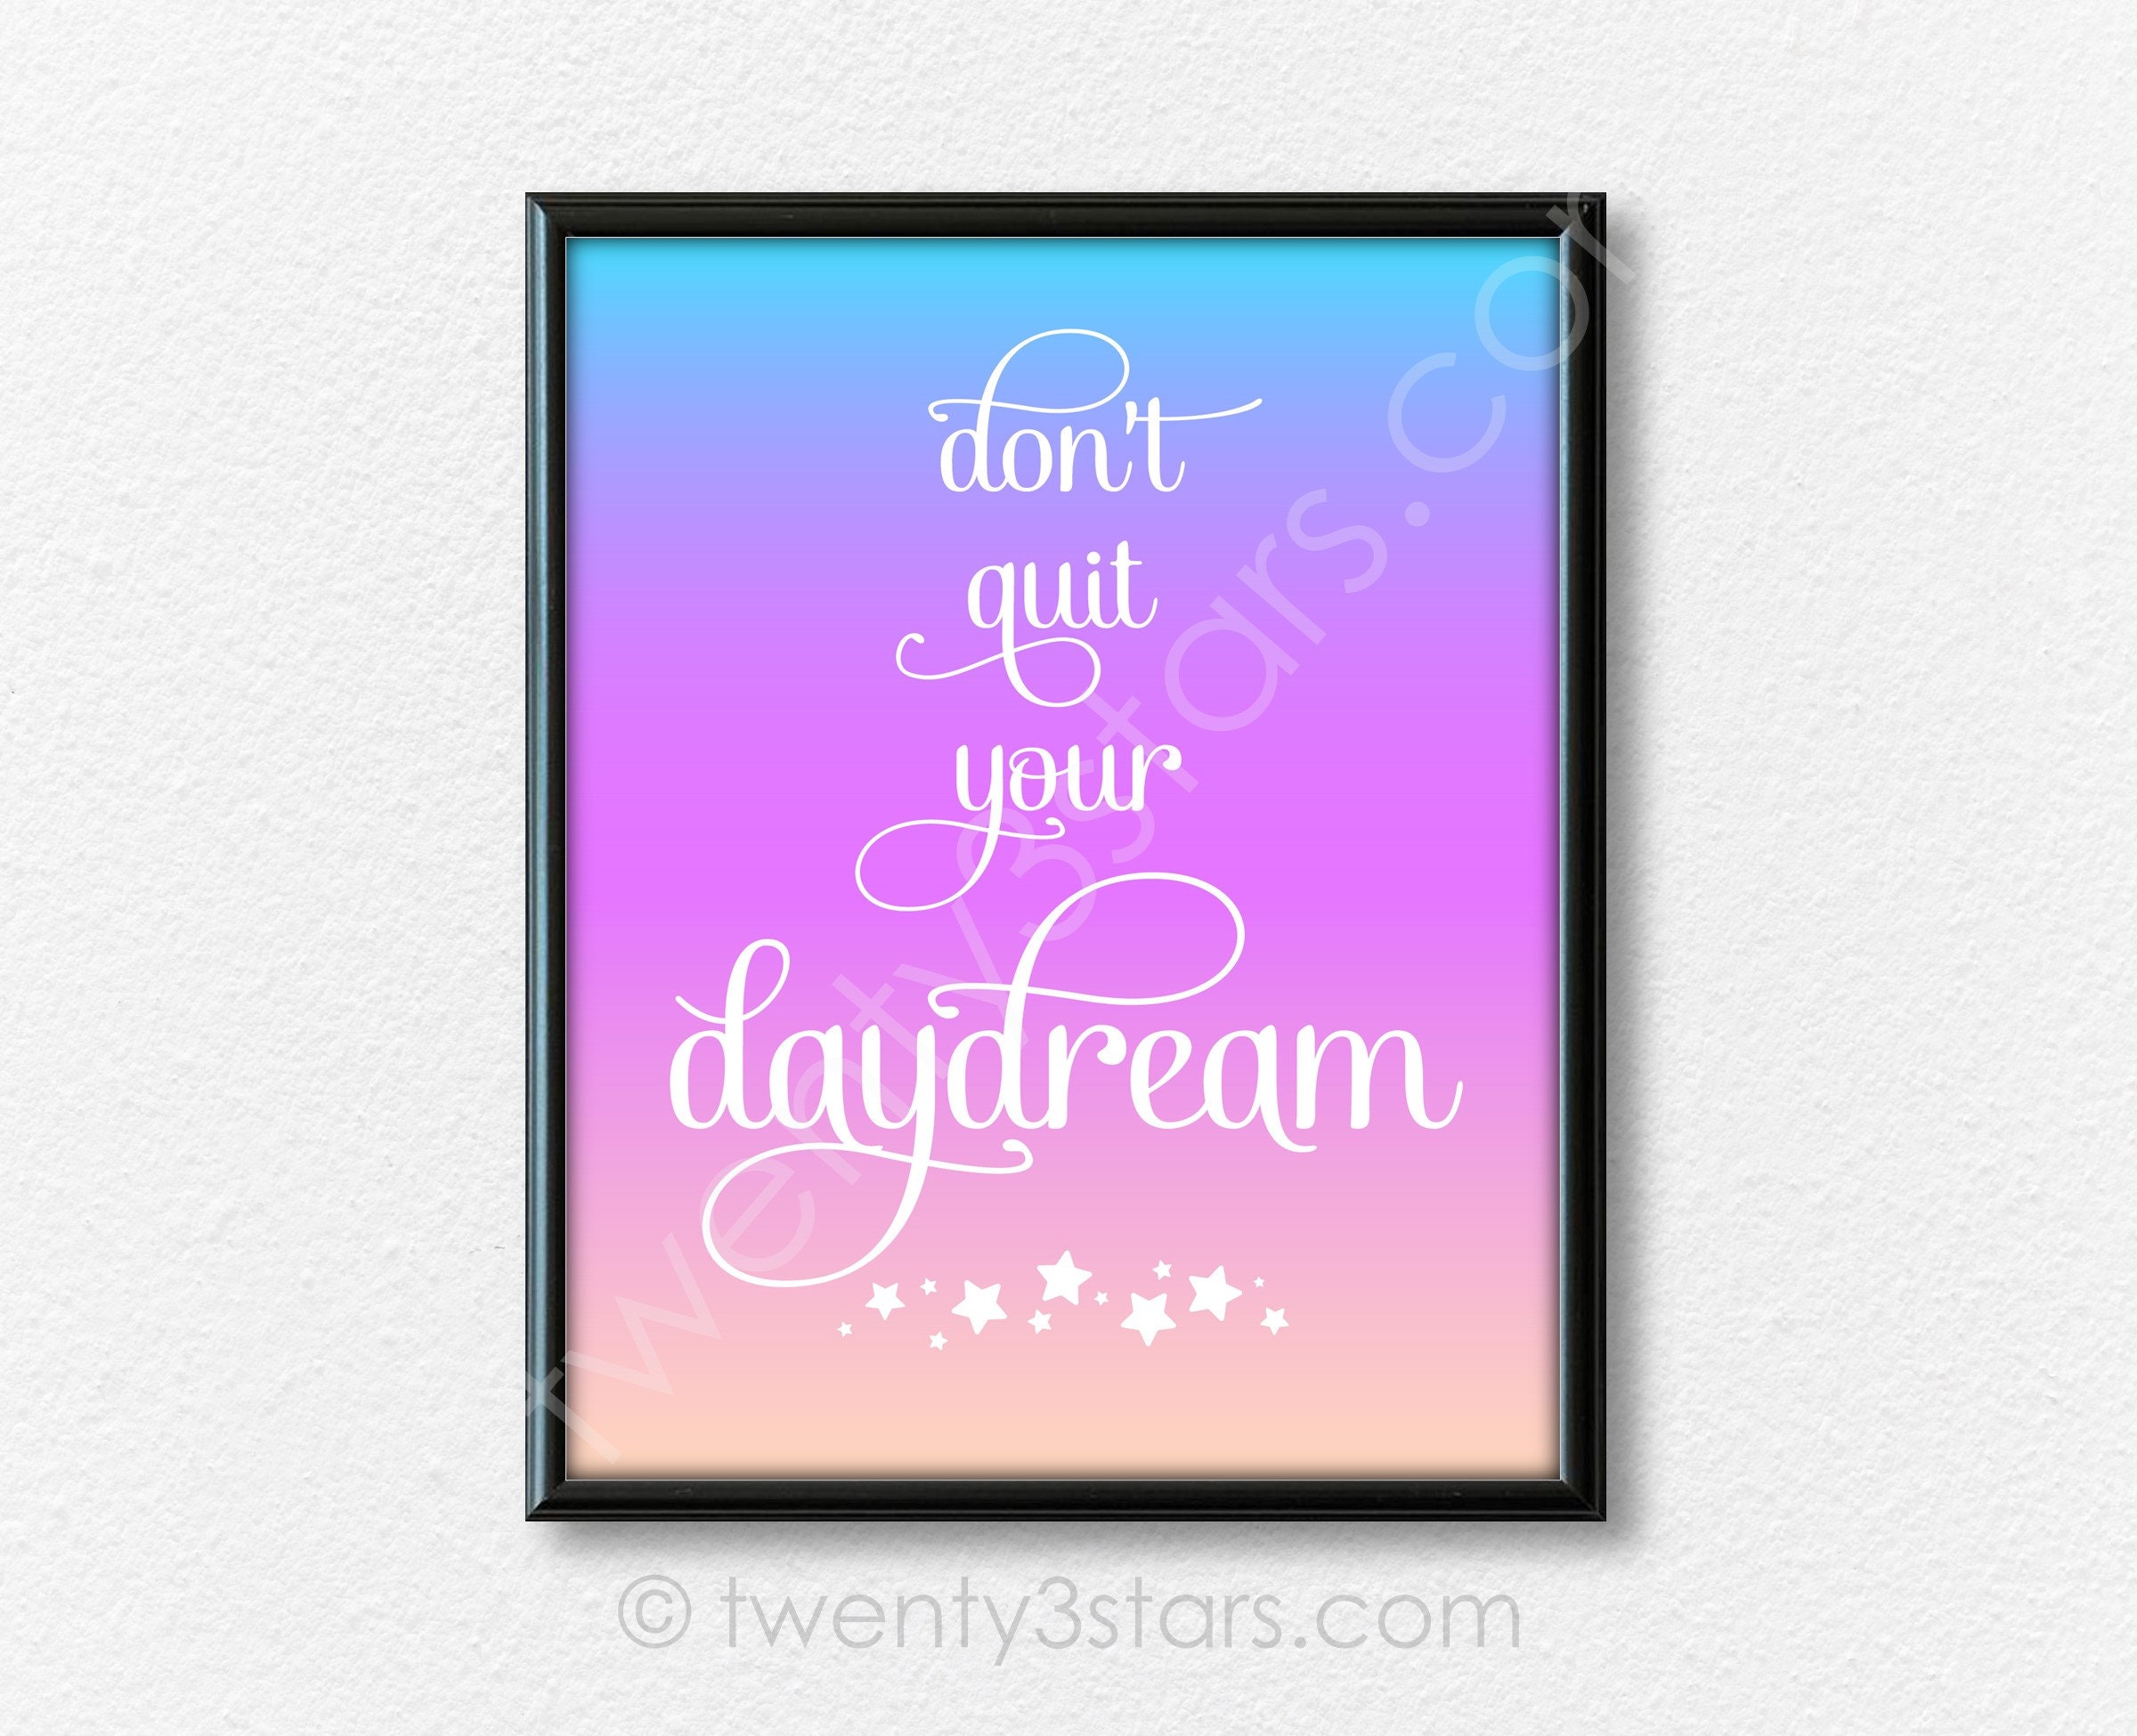 The Color Wheel Poster - Daydream Education